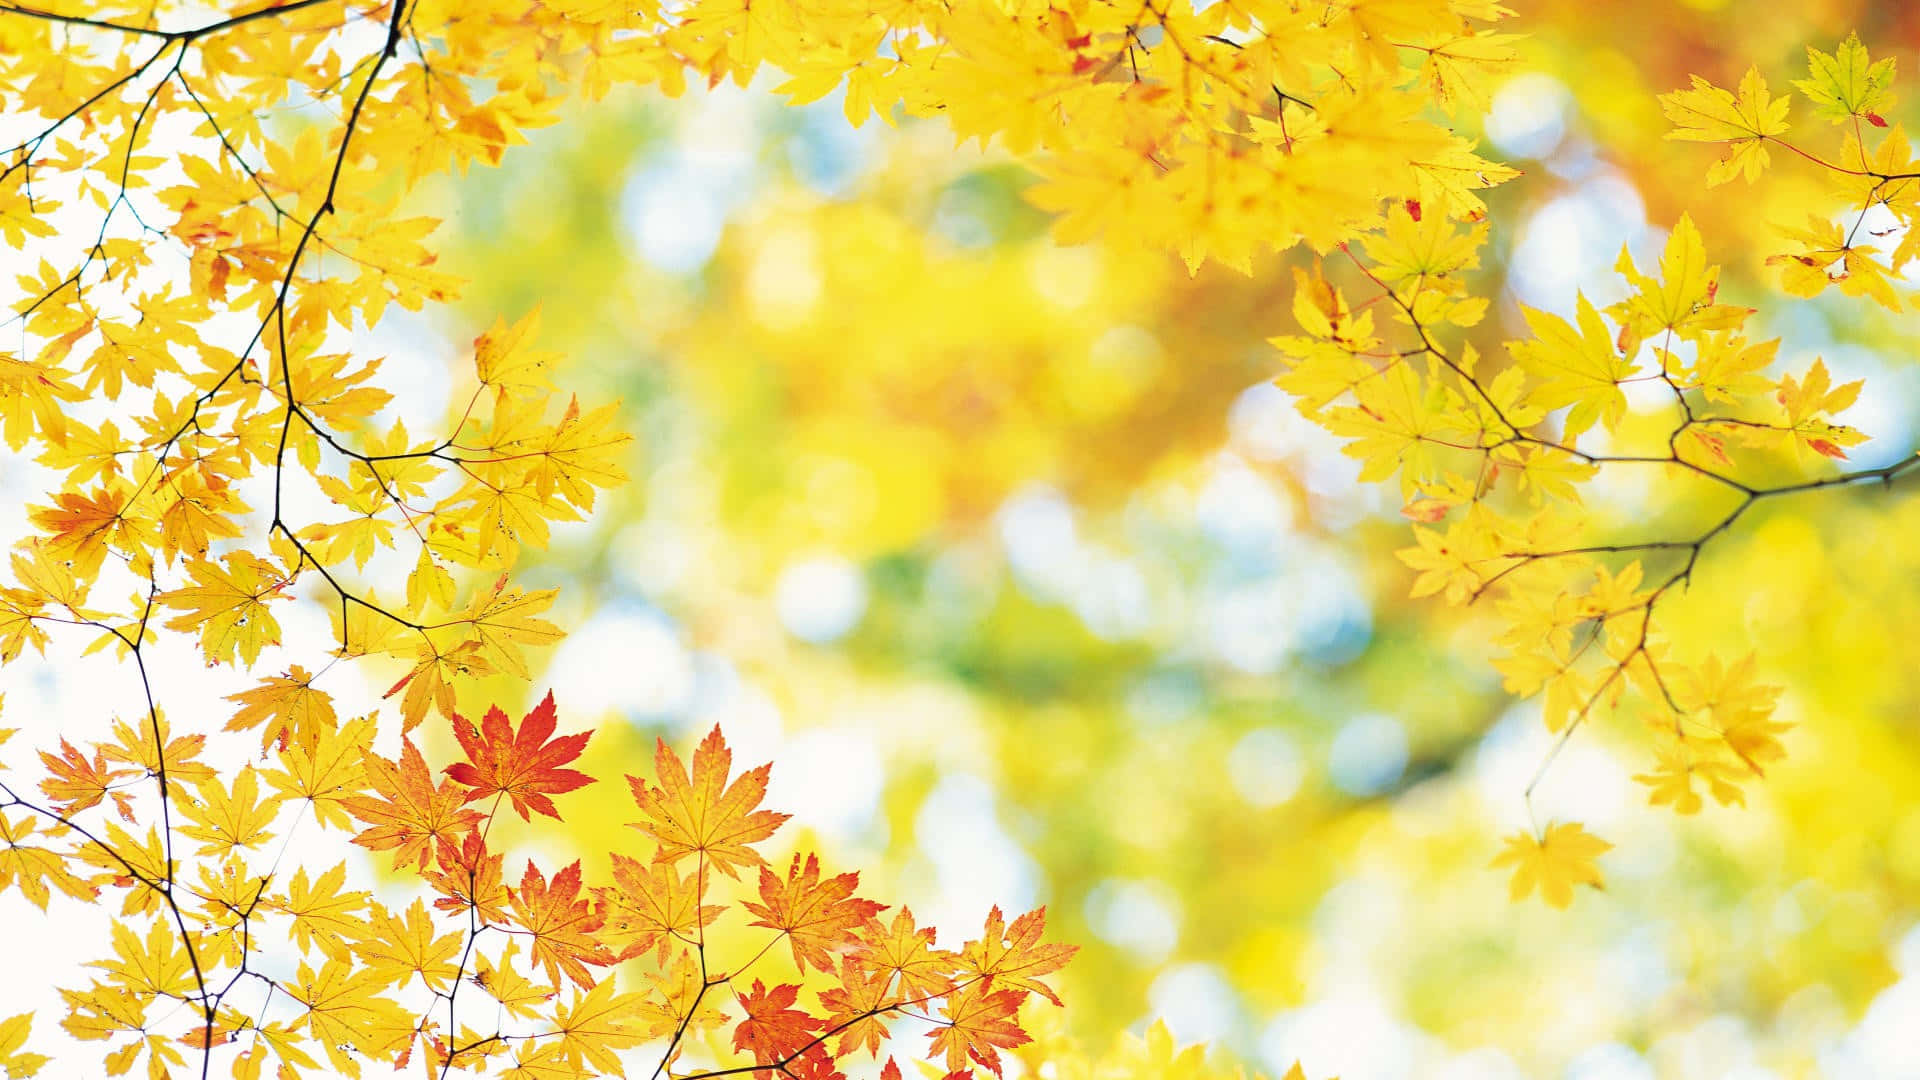 Yellow Leaves on a Bright Autumn Day Wallpaper